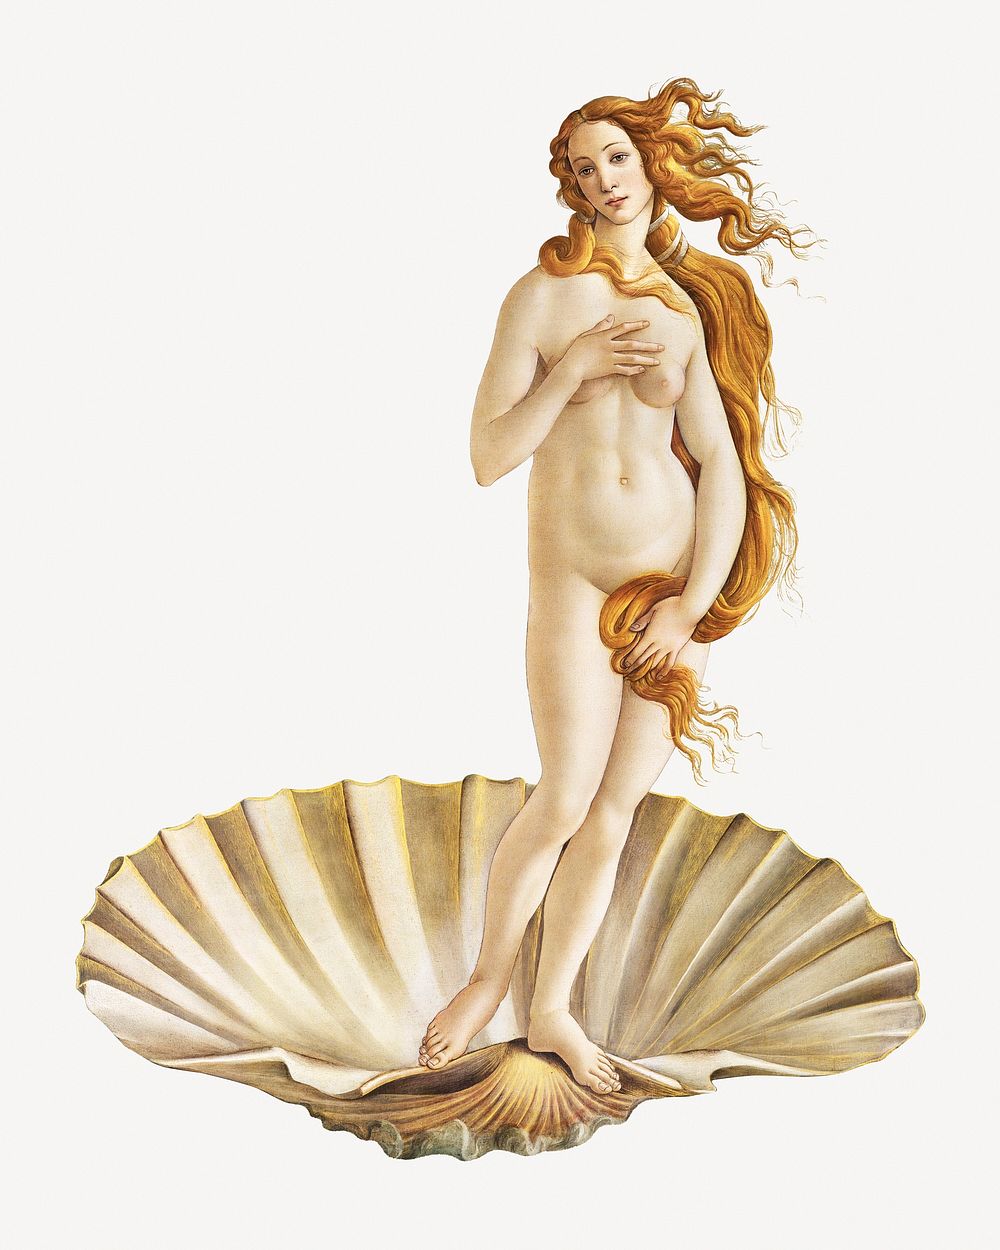 Aesthetic Sandro Botticelli's Venus psd.  Remastered by rawpixel